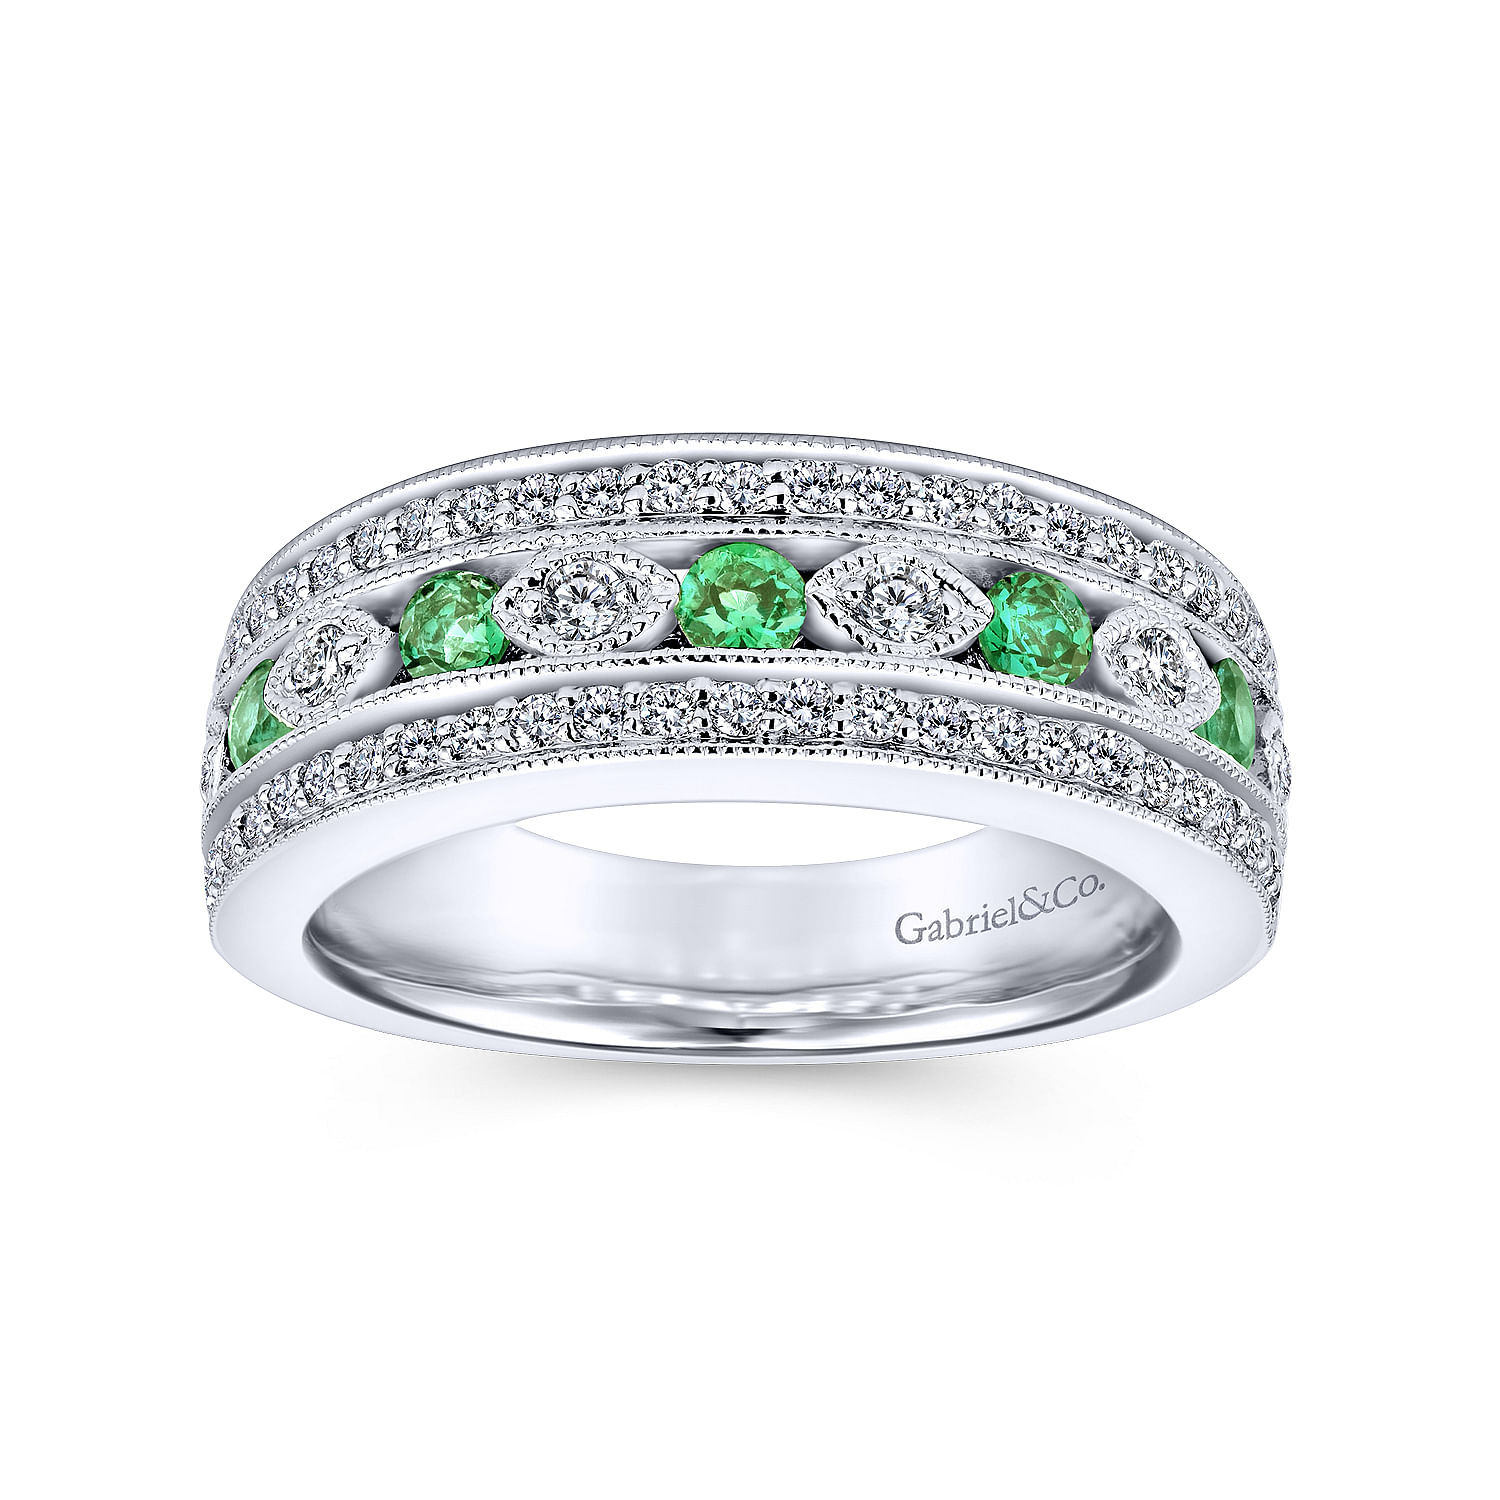 14K White Gold Vintage Inspired Emerald and Diamond Ring